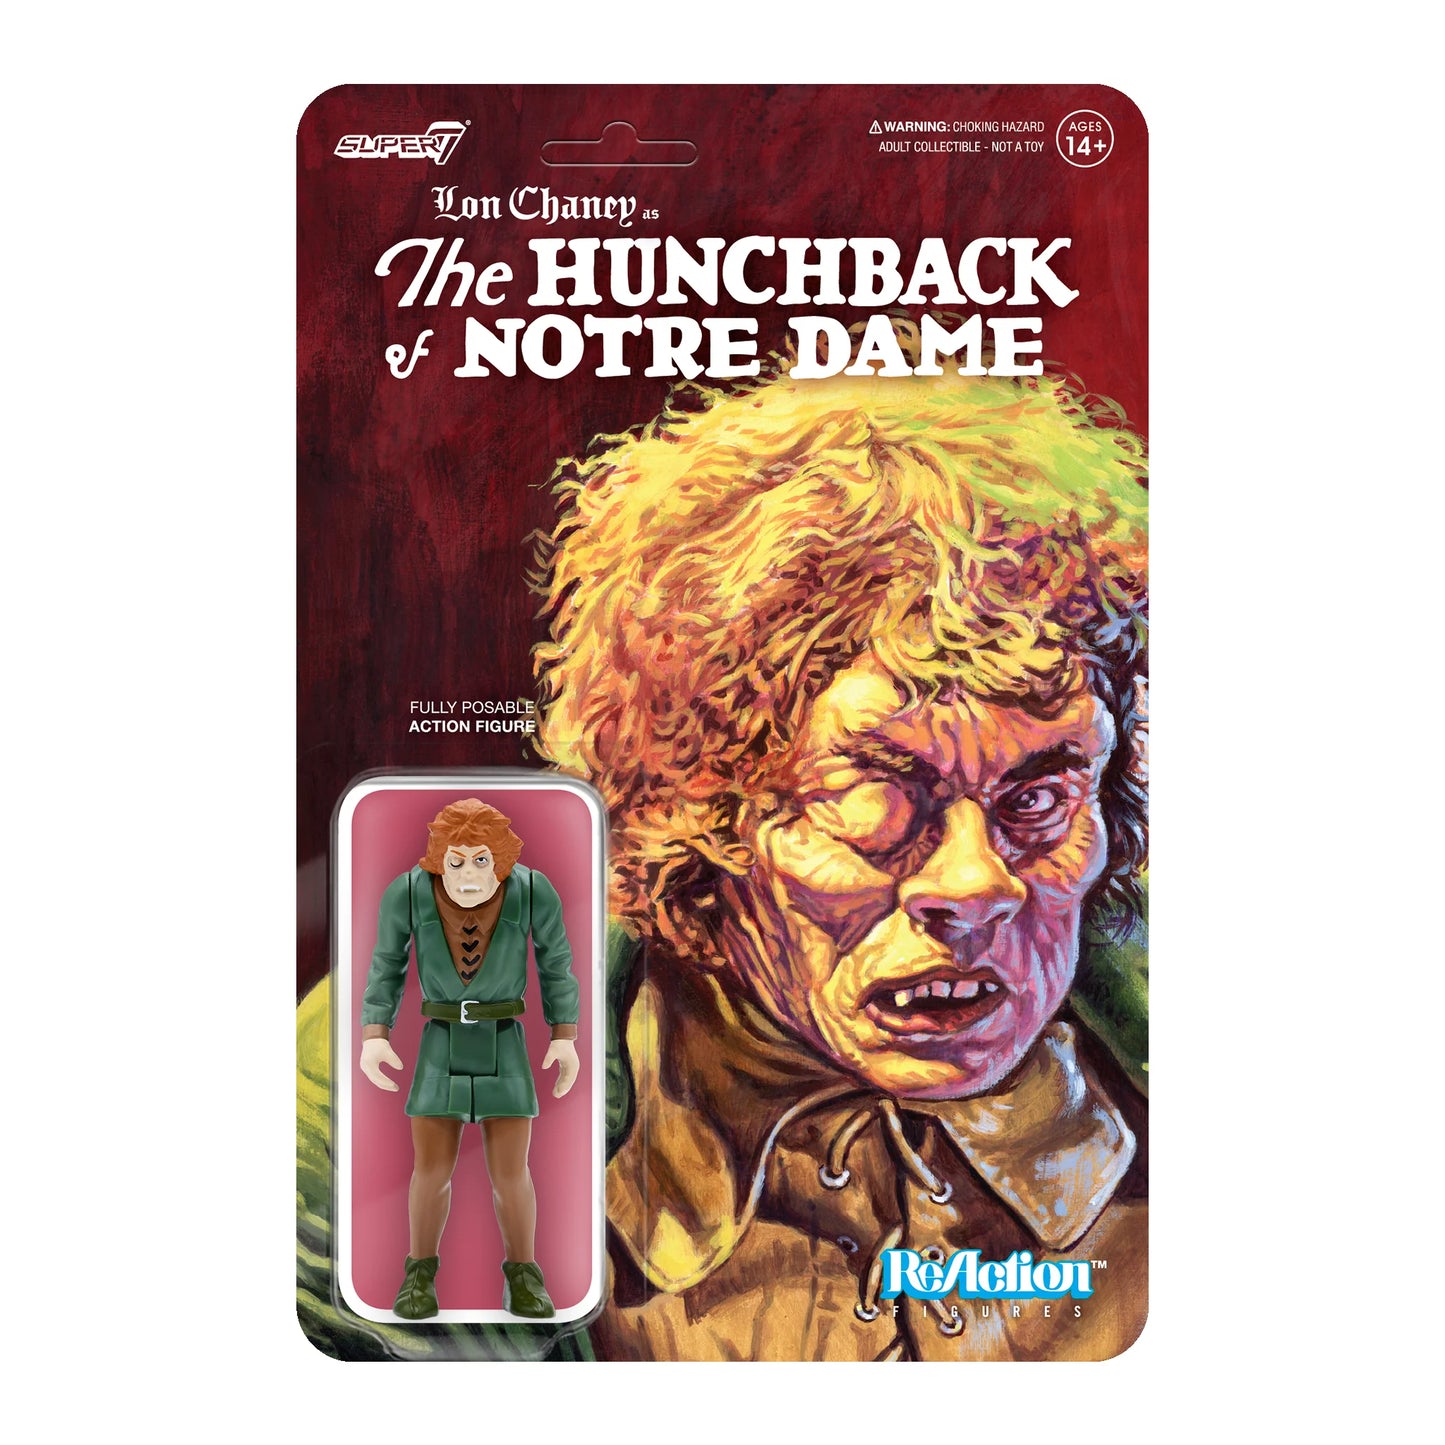 Universal Monsters ReAction Figure- The Hunchback of Notre Dame